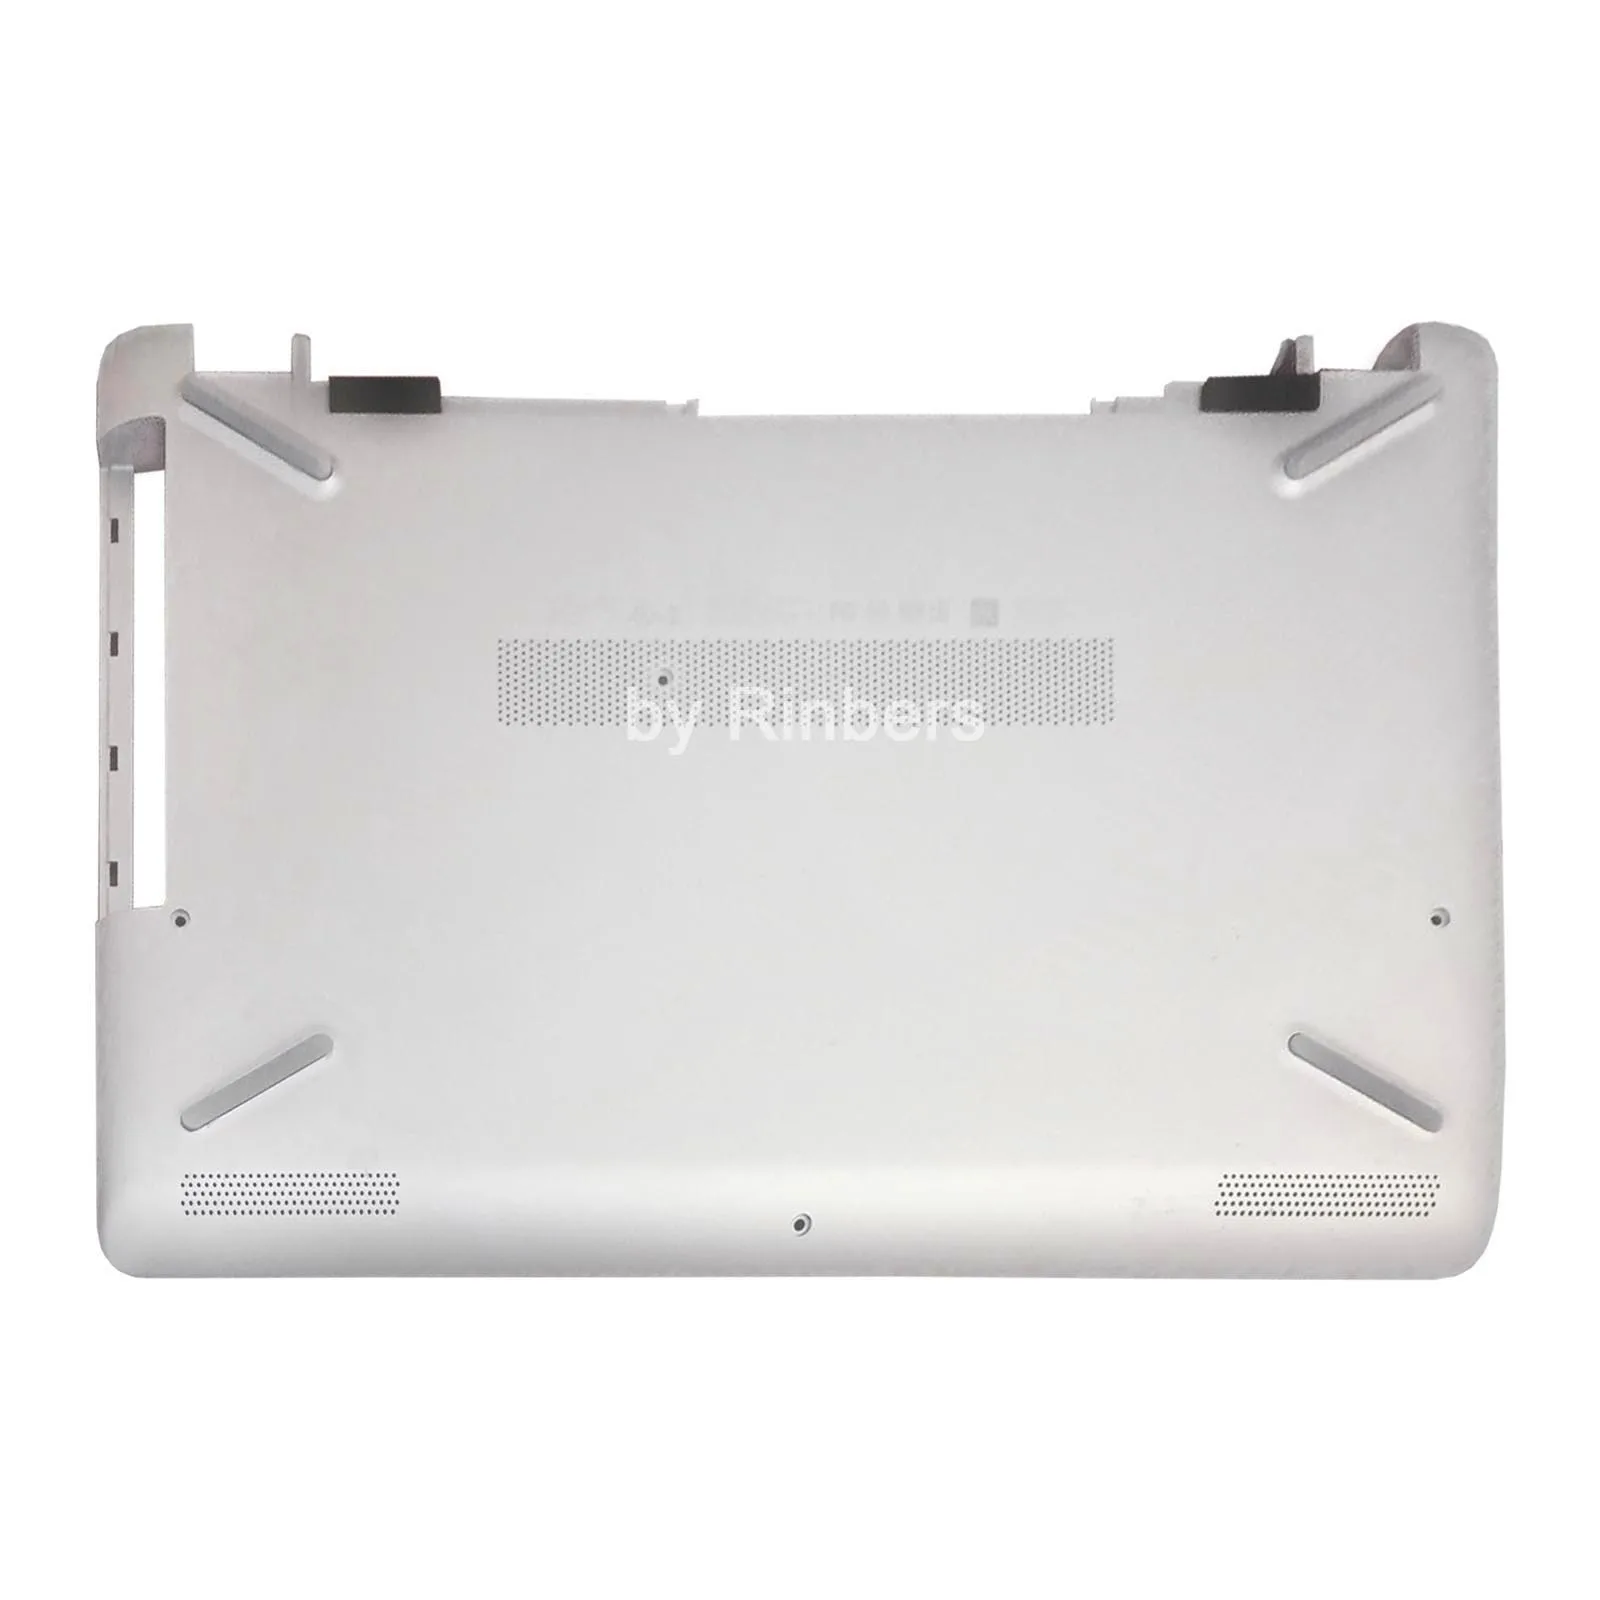 
924908-001 White Lower Bottom Case Base Cover Replacement for HP Pavilion 15-BP 15-BS 15-BU 15-BW 250/255 G6 